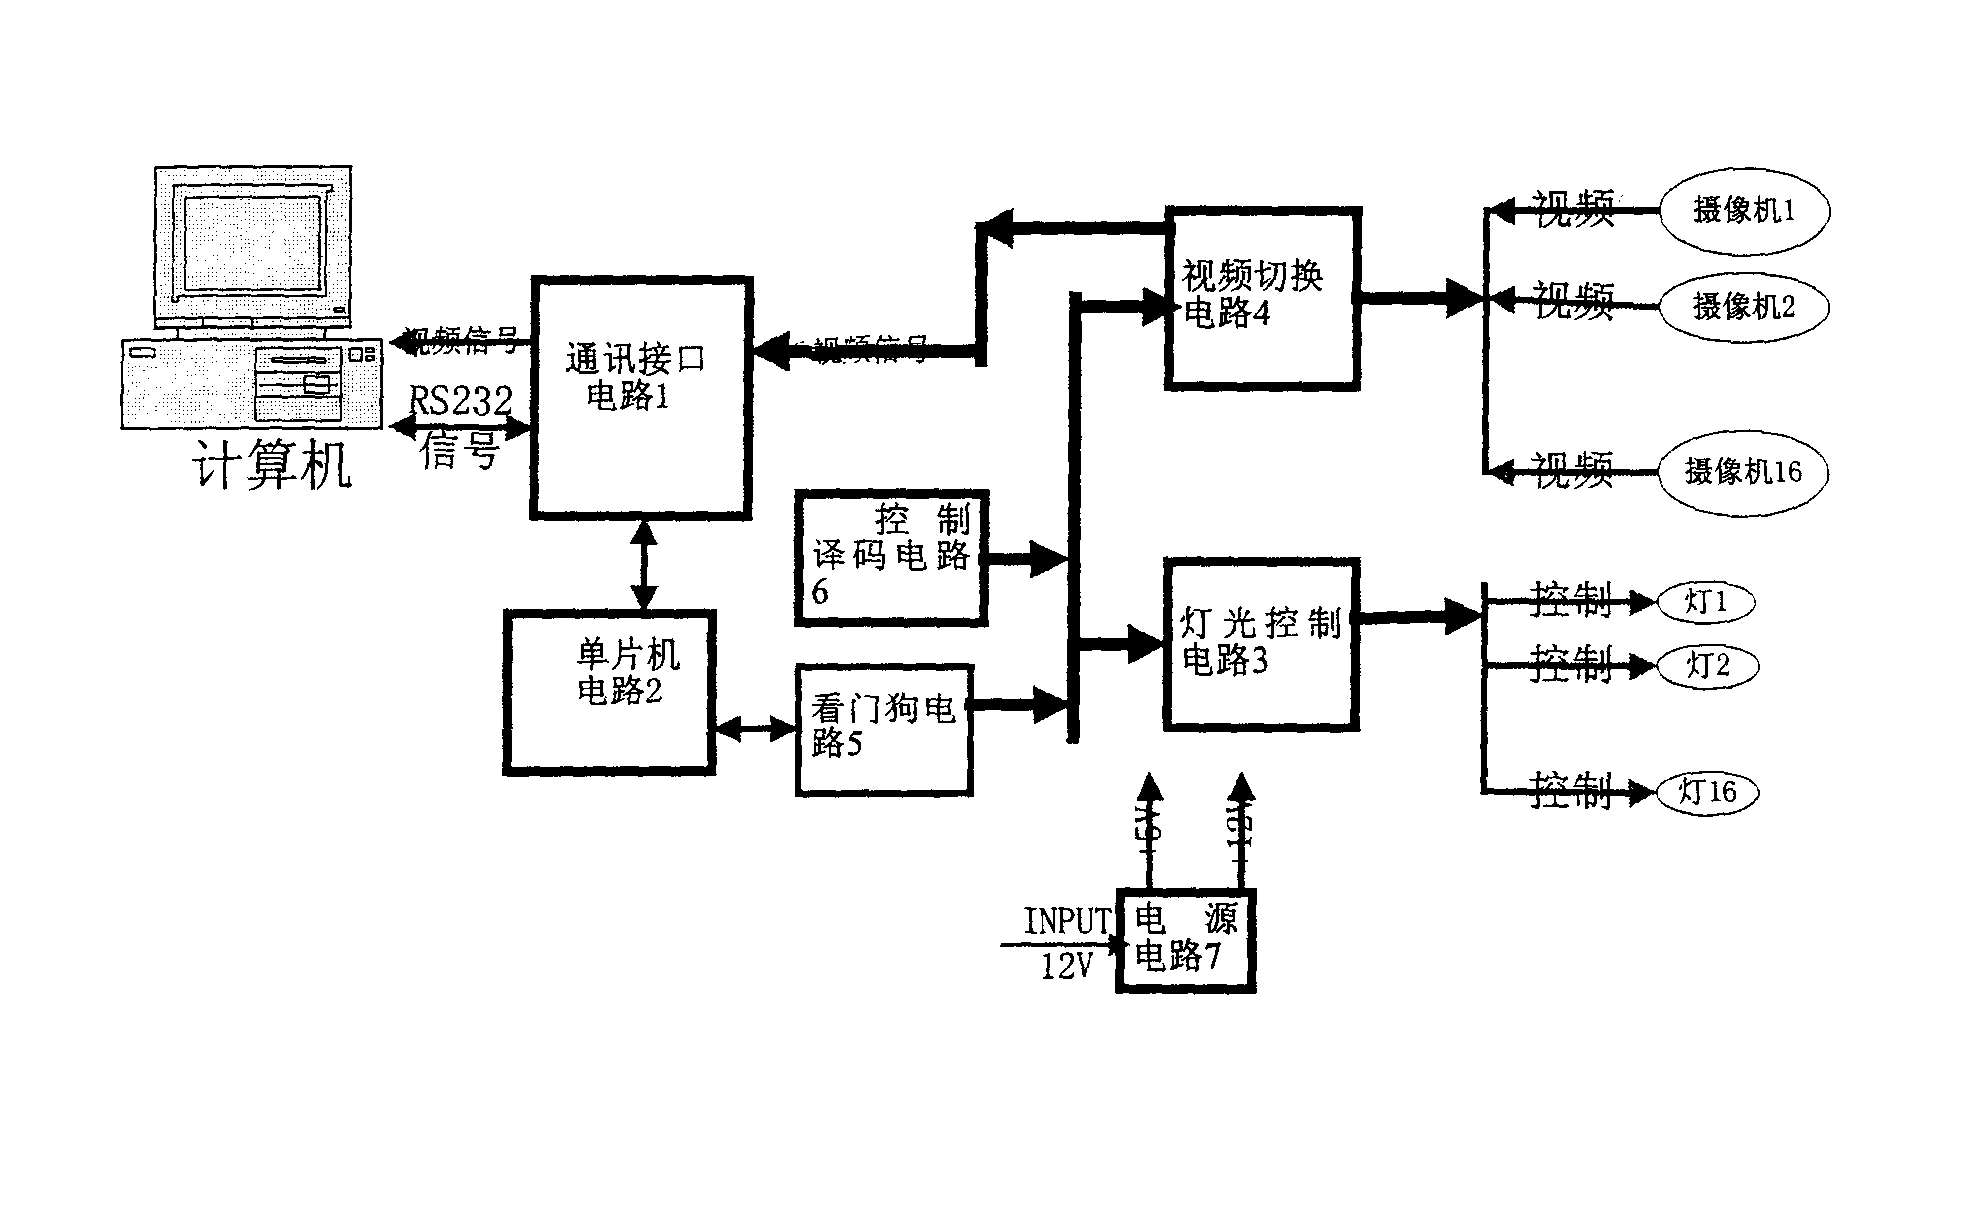 Light and vedio frequency switching integrated controller